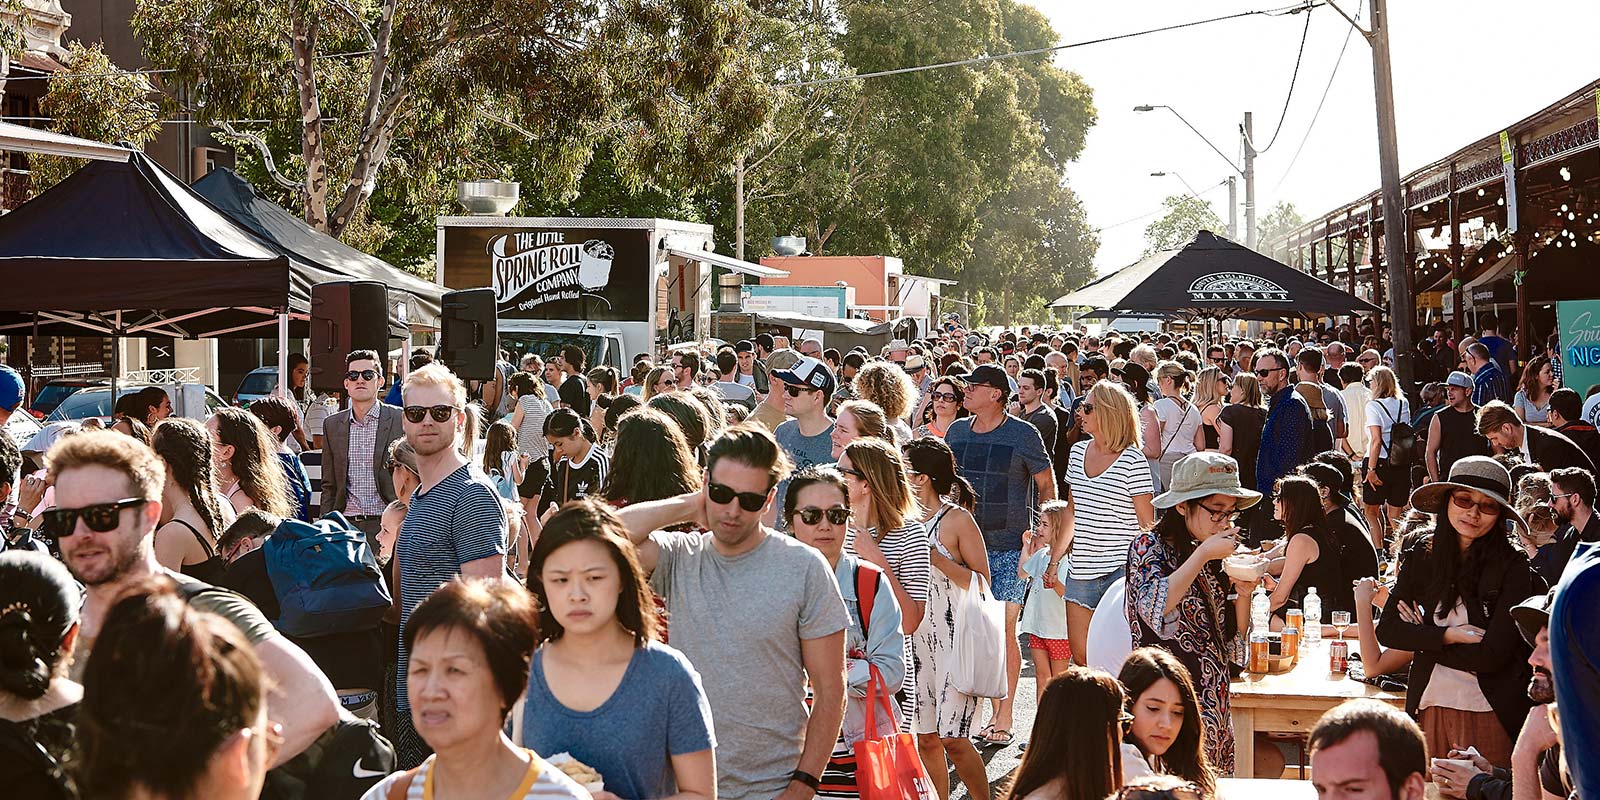 A crowd of people gather at an outdoor food festival in Melbourne